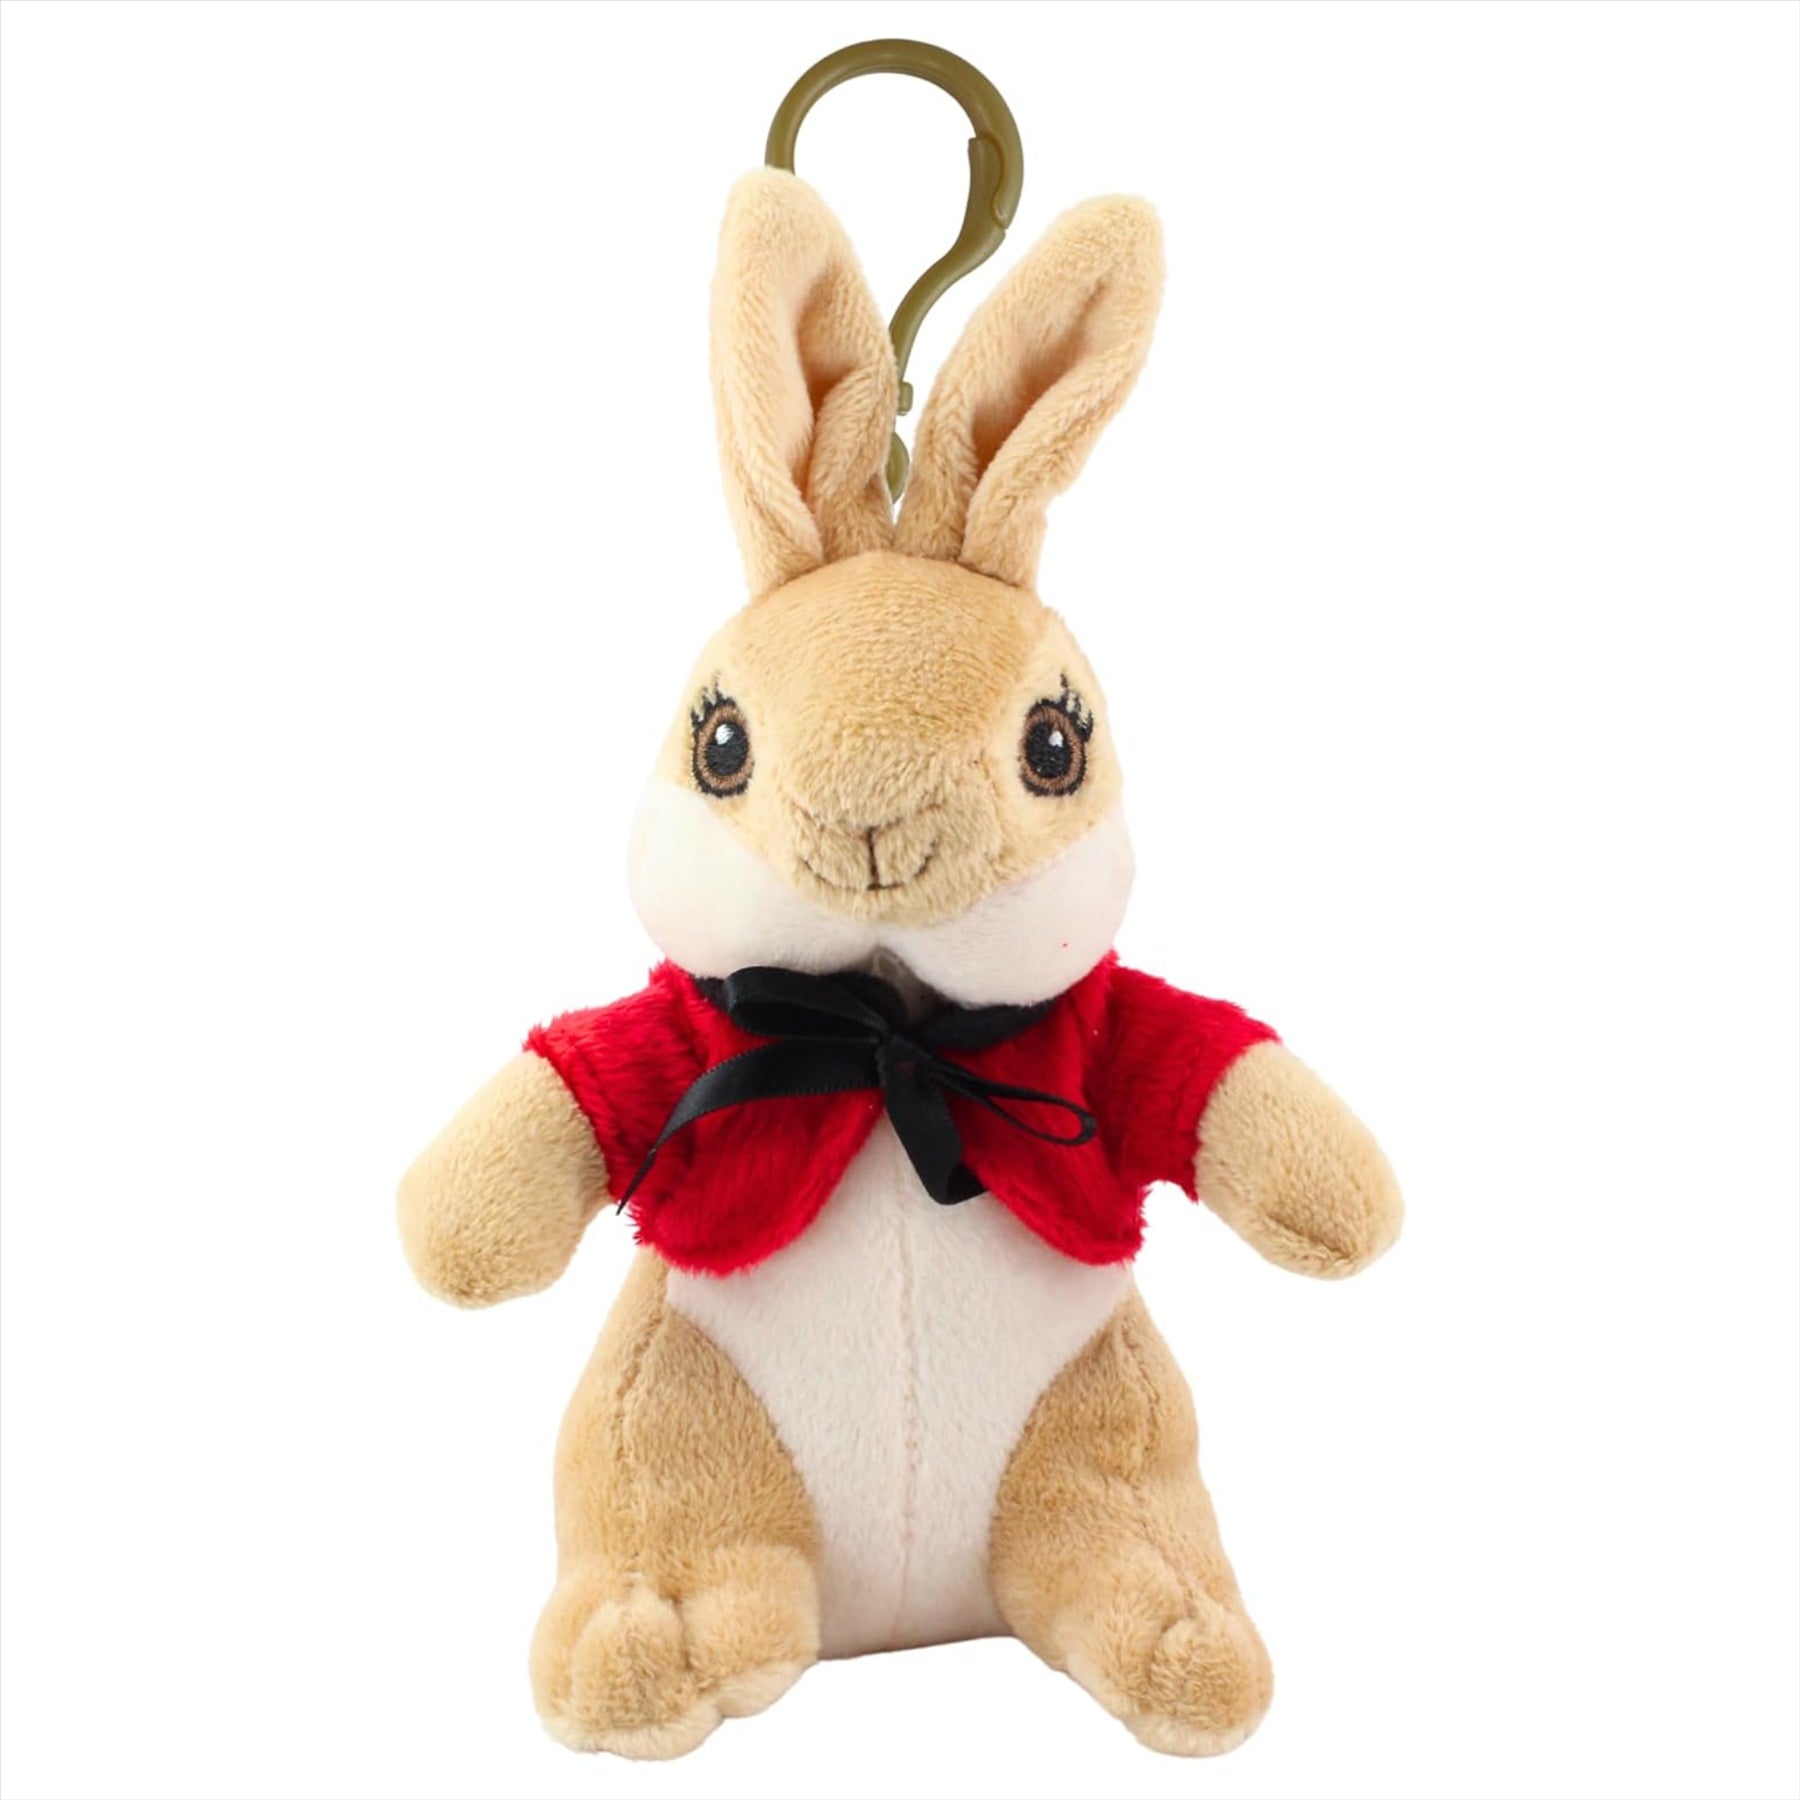 Peter Rabbit Super Soft Gift Quality 12cm Embroidered Plush Keyclips Set of All 3 - Peter Rabbit, Flopsy, and Benjamin